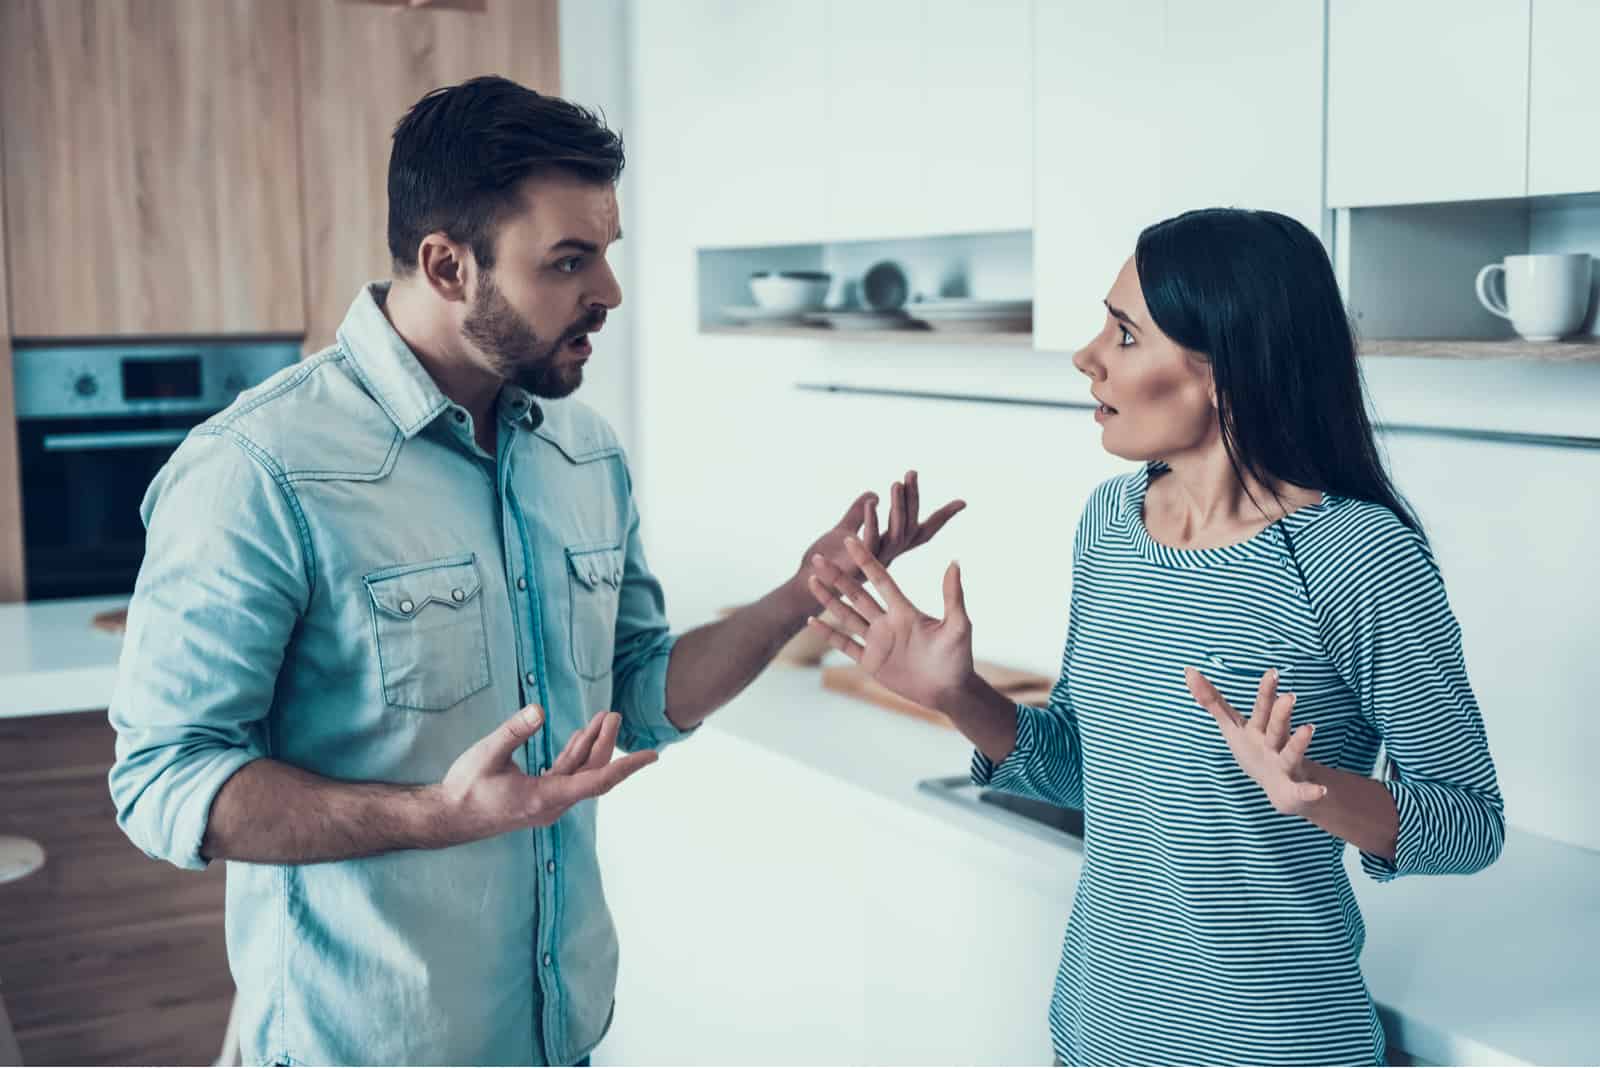 a man and a woman are standing in the kitchen arguing